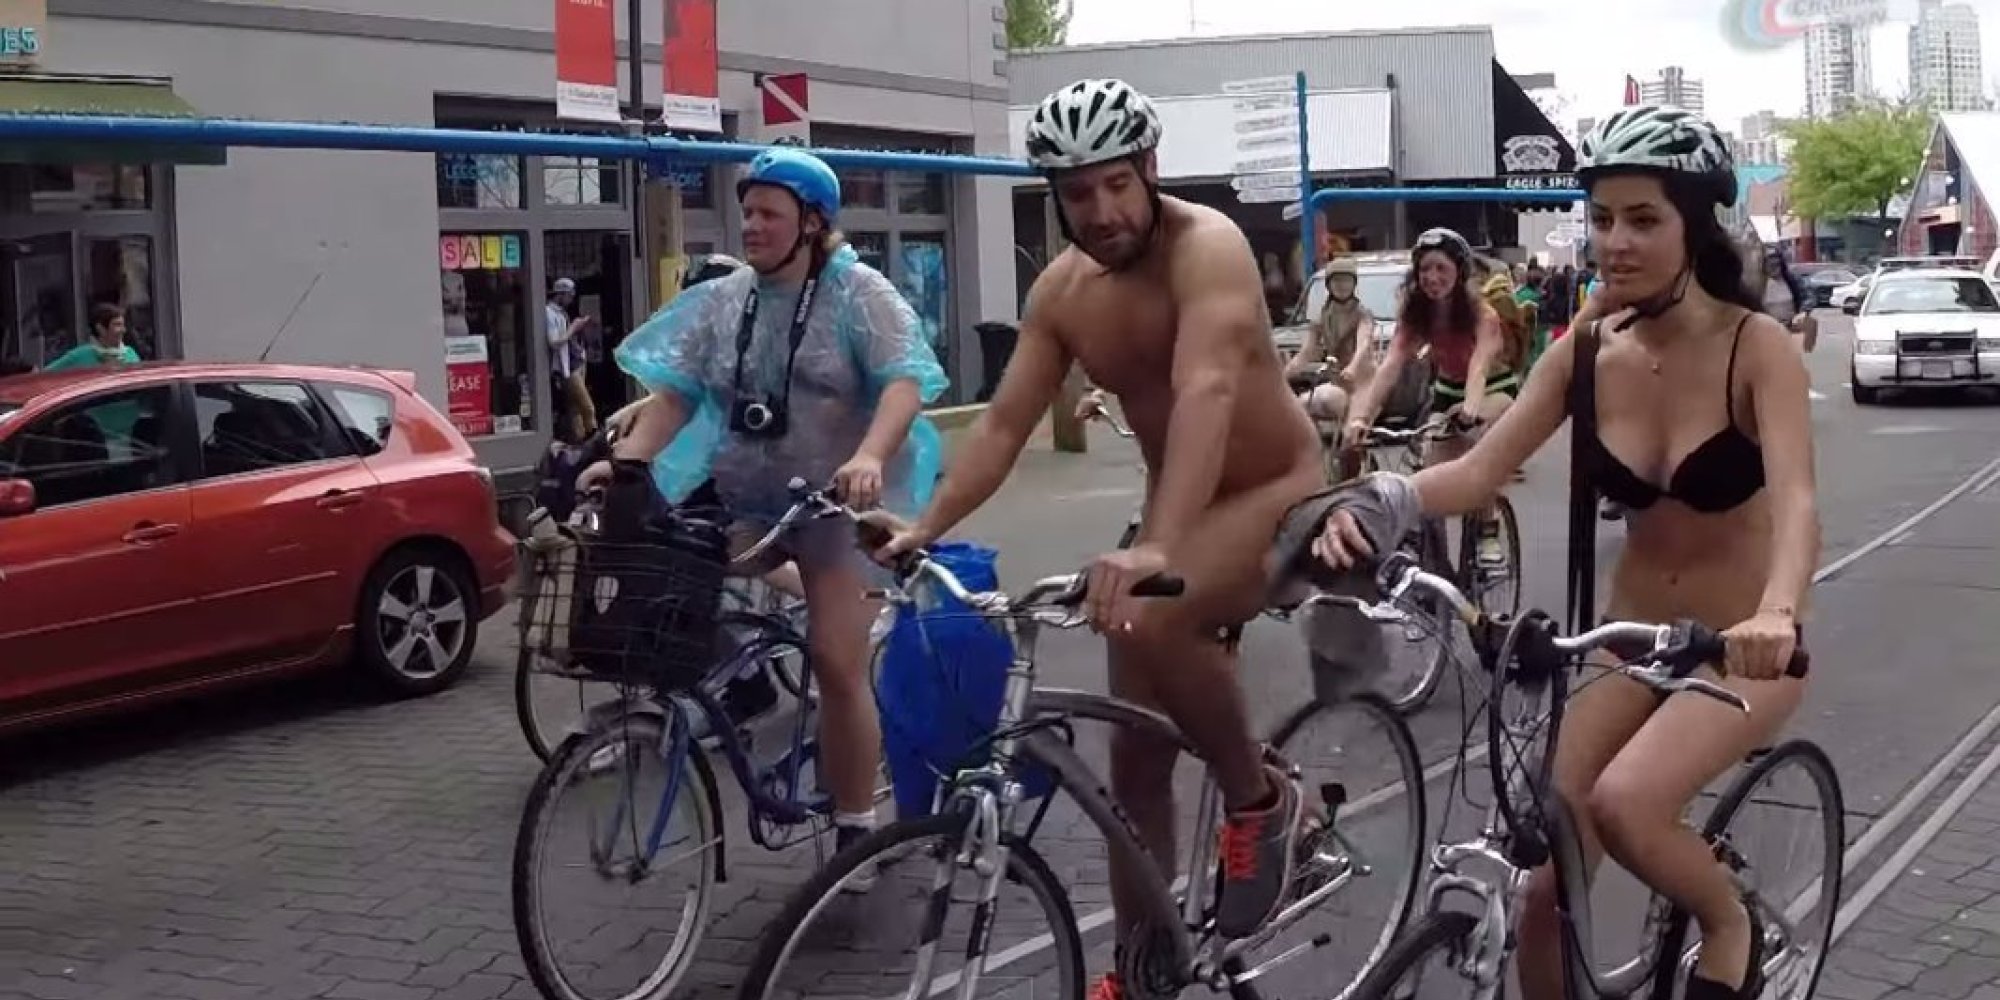 Nude Bicycle Ride 5